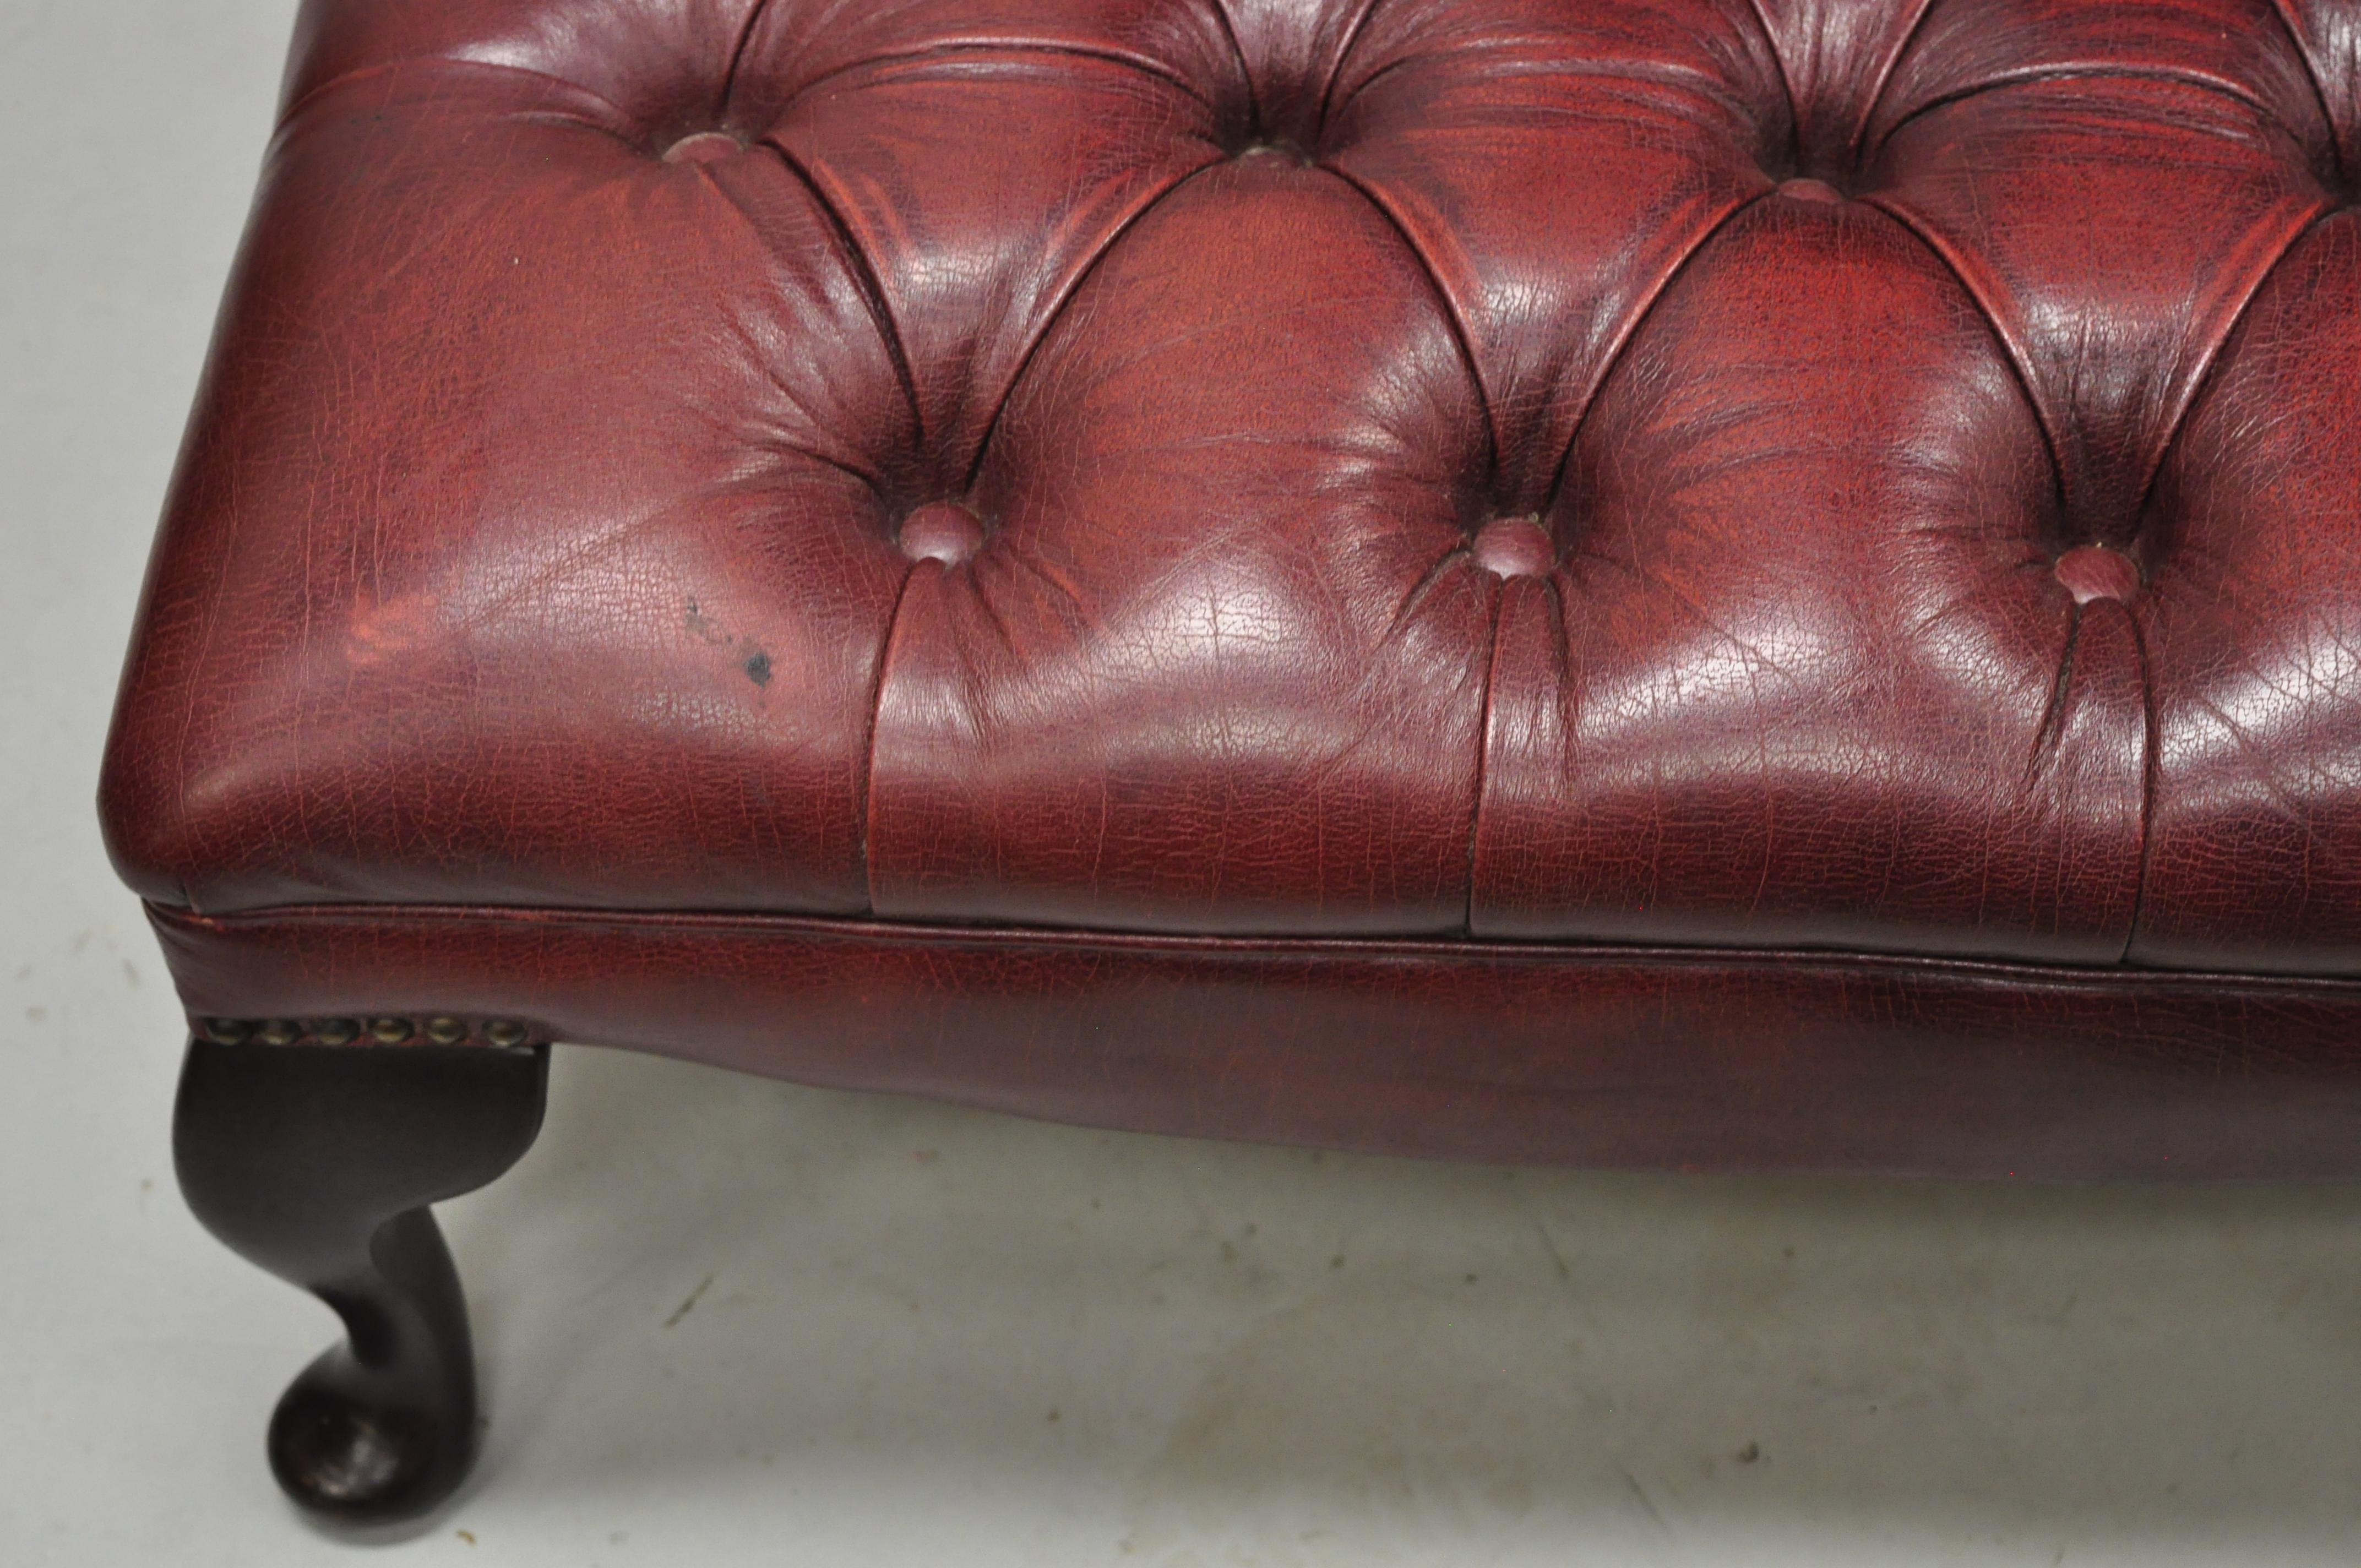 Vintage English Chesterfield Burgundy Leather Tufted Wingback Chair and Ottoman 1